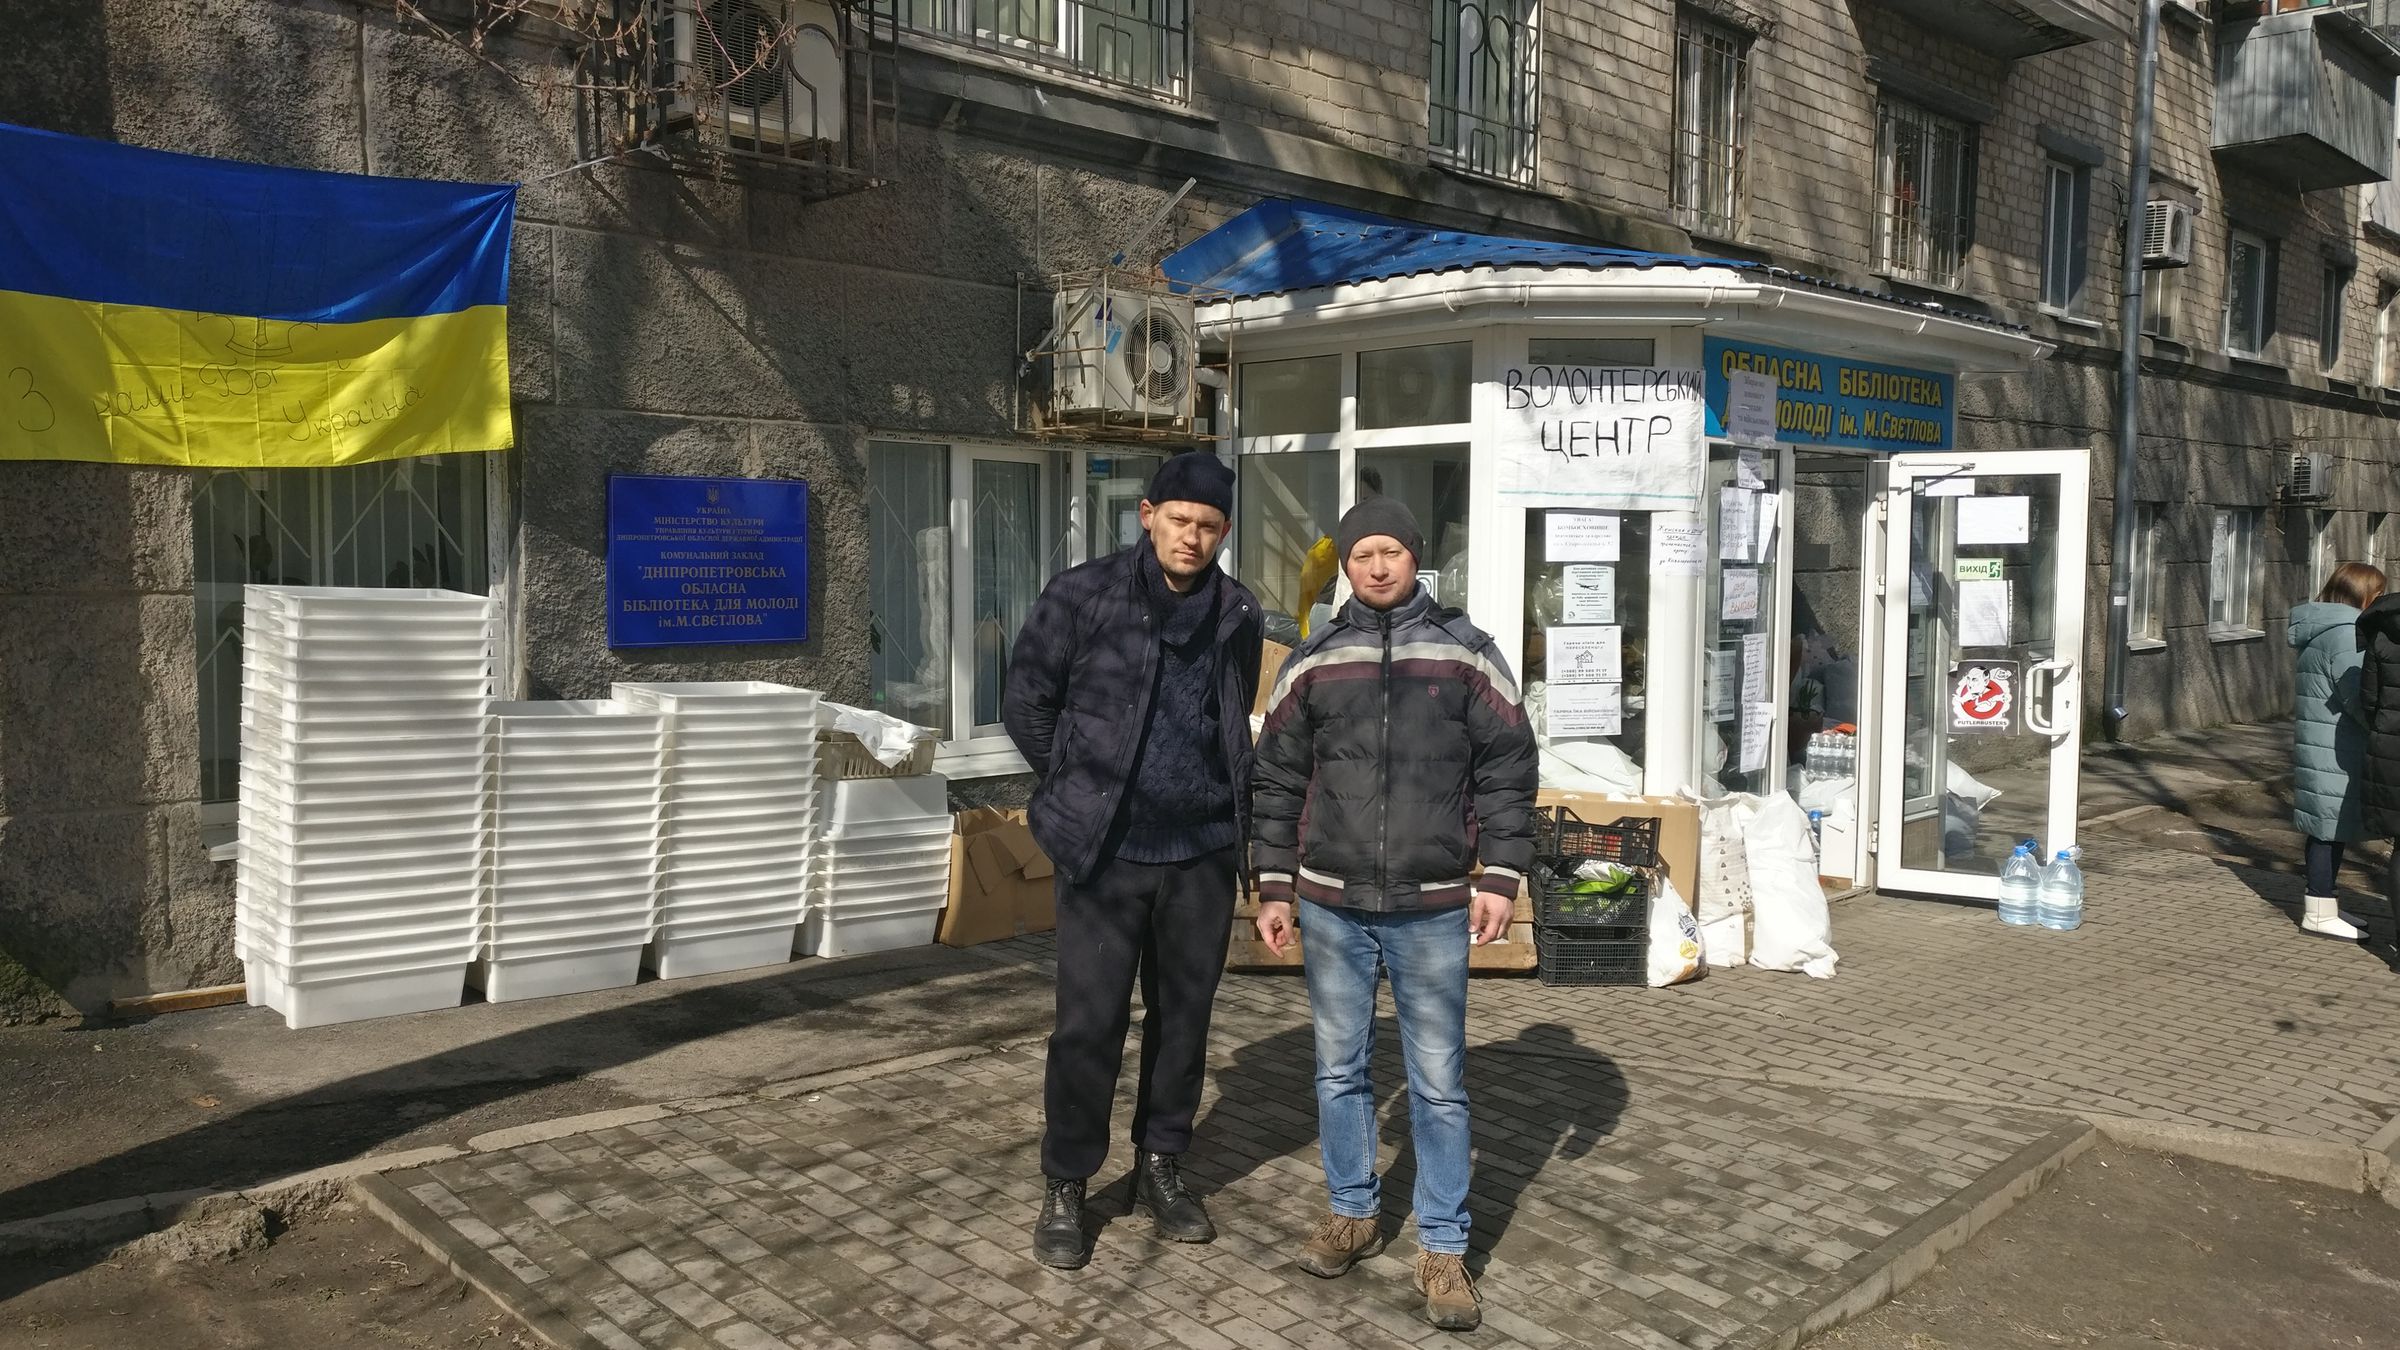 Oleksandr Pypka (left), a mathematics professor, and Vitalii Palchykov (right), an organic chemist, both of Dnipro National University, at a volunteer center in Dnipro, Ukraine, on March 7, 2022.